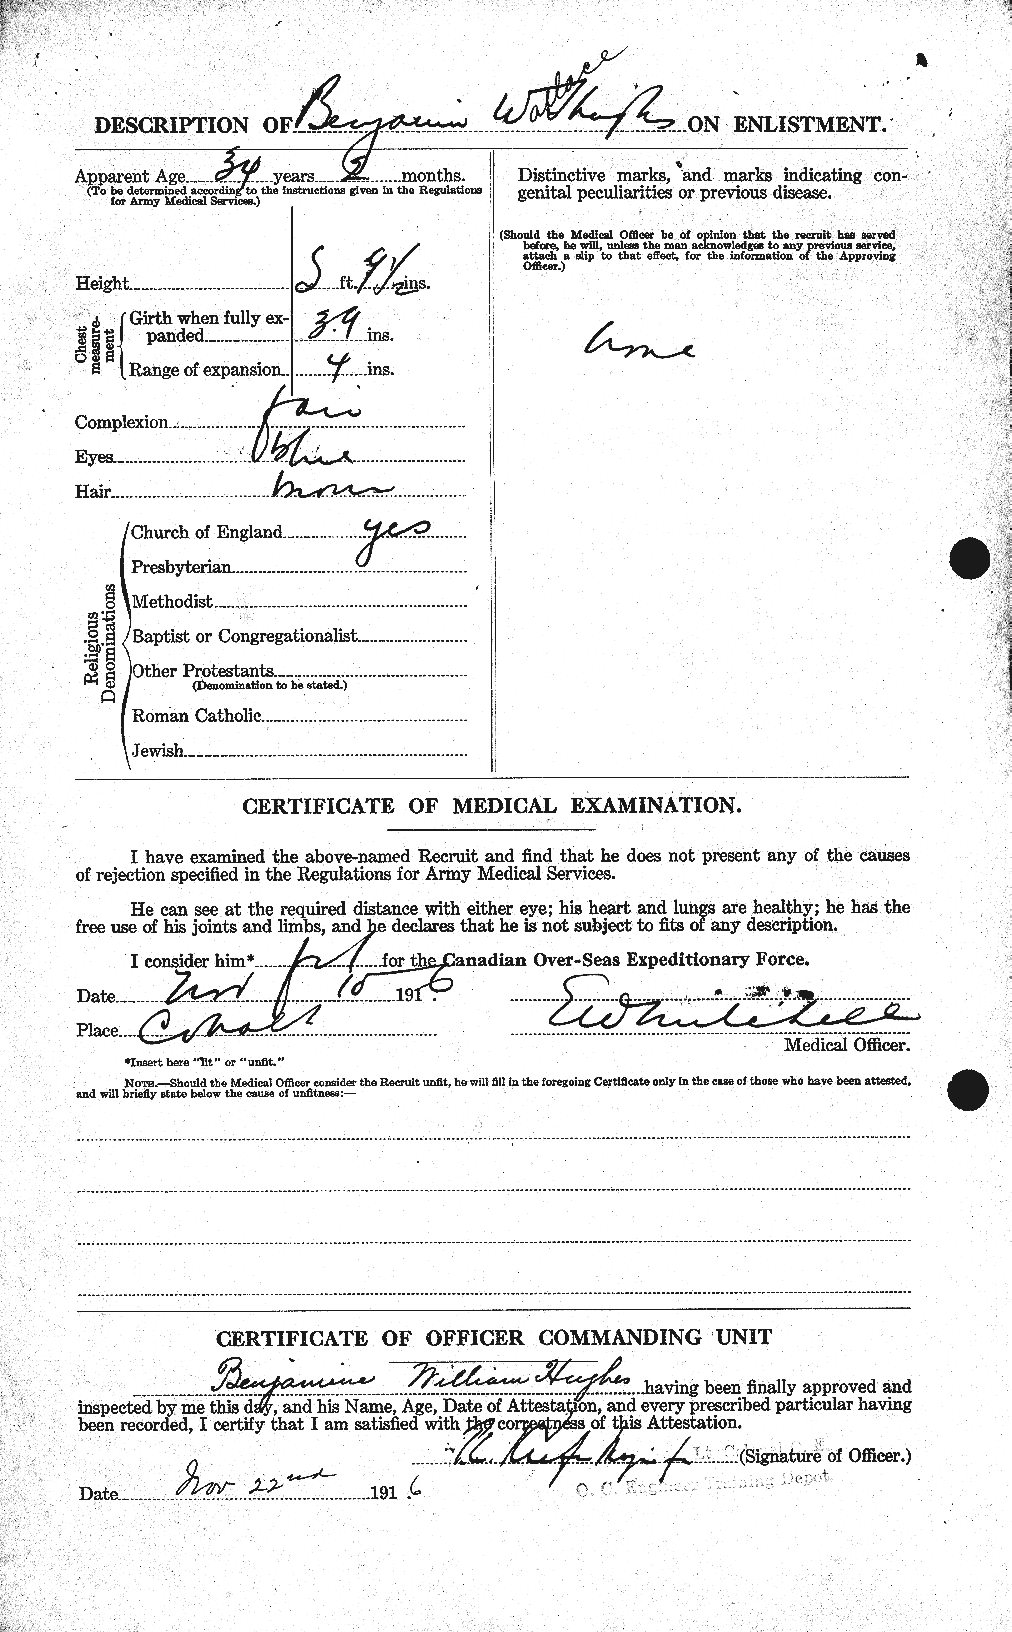 Personnel Records of the First World War - CEF 402579b